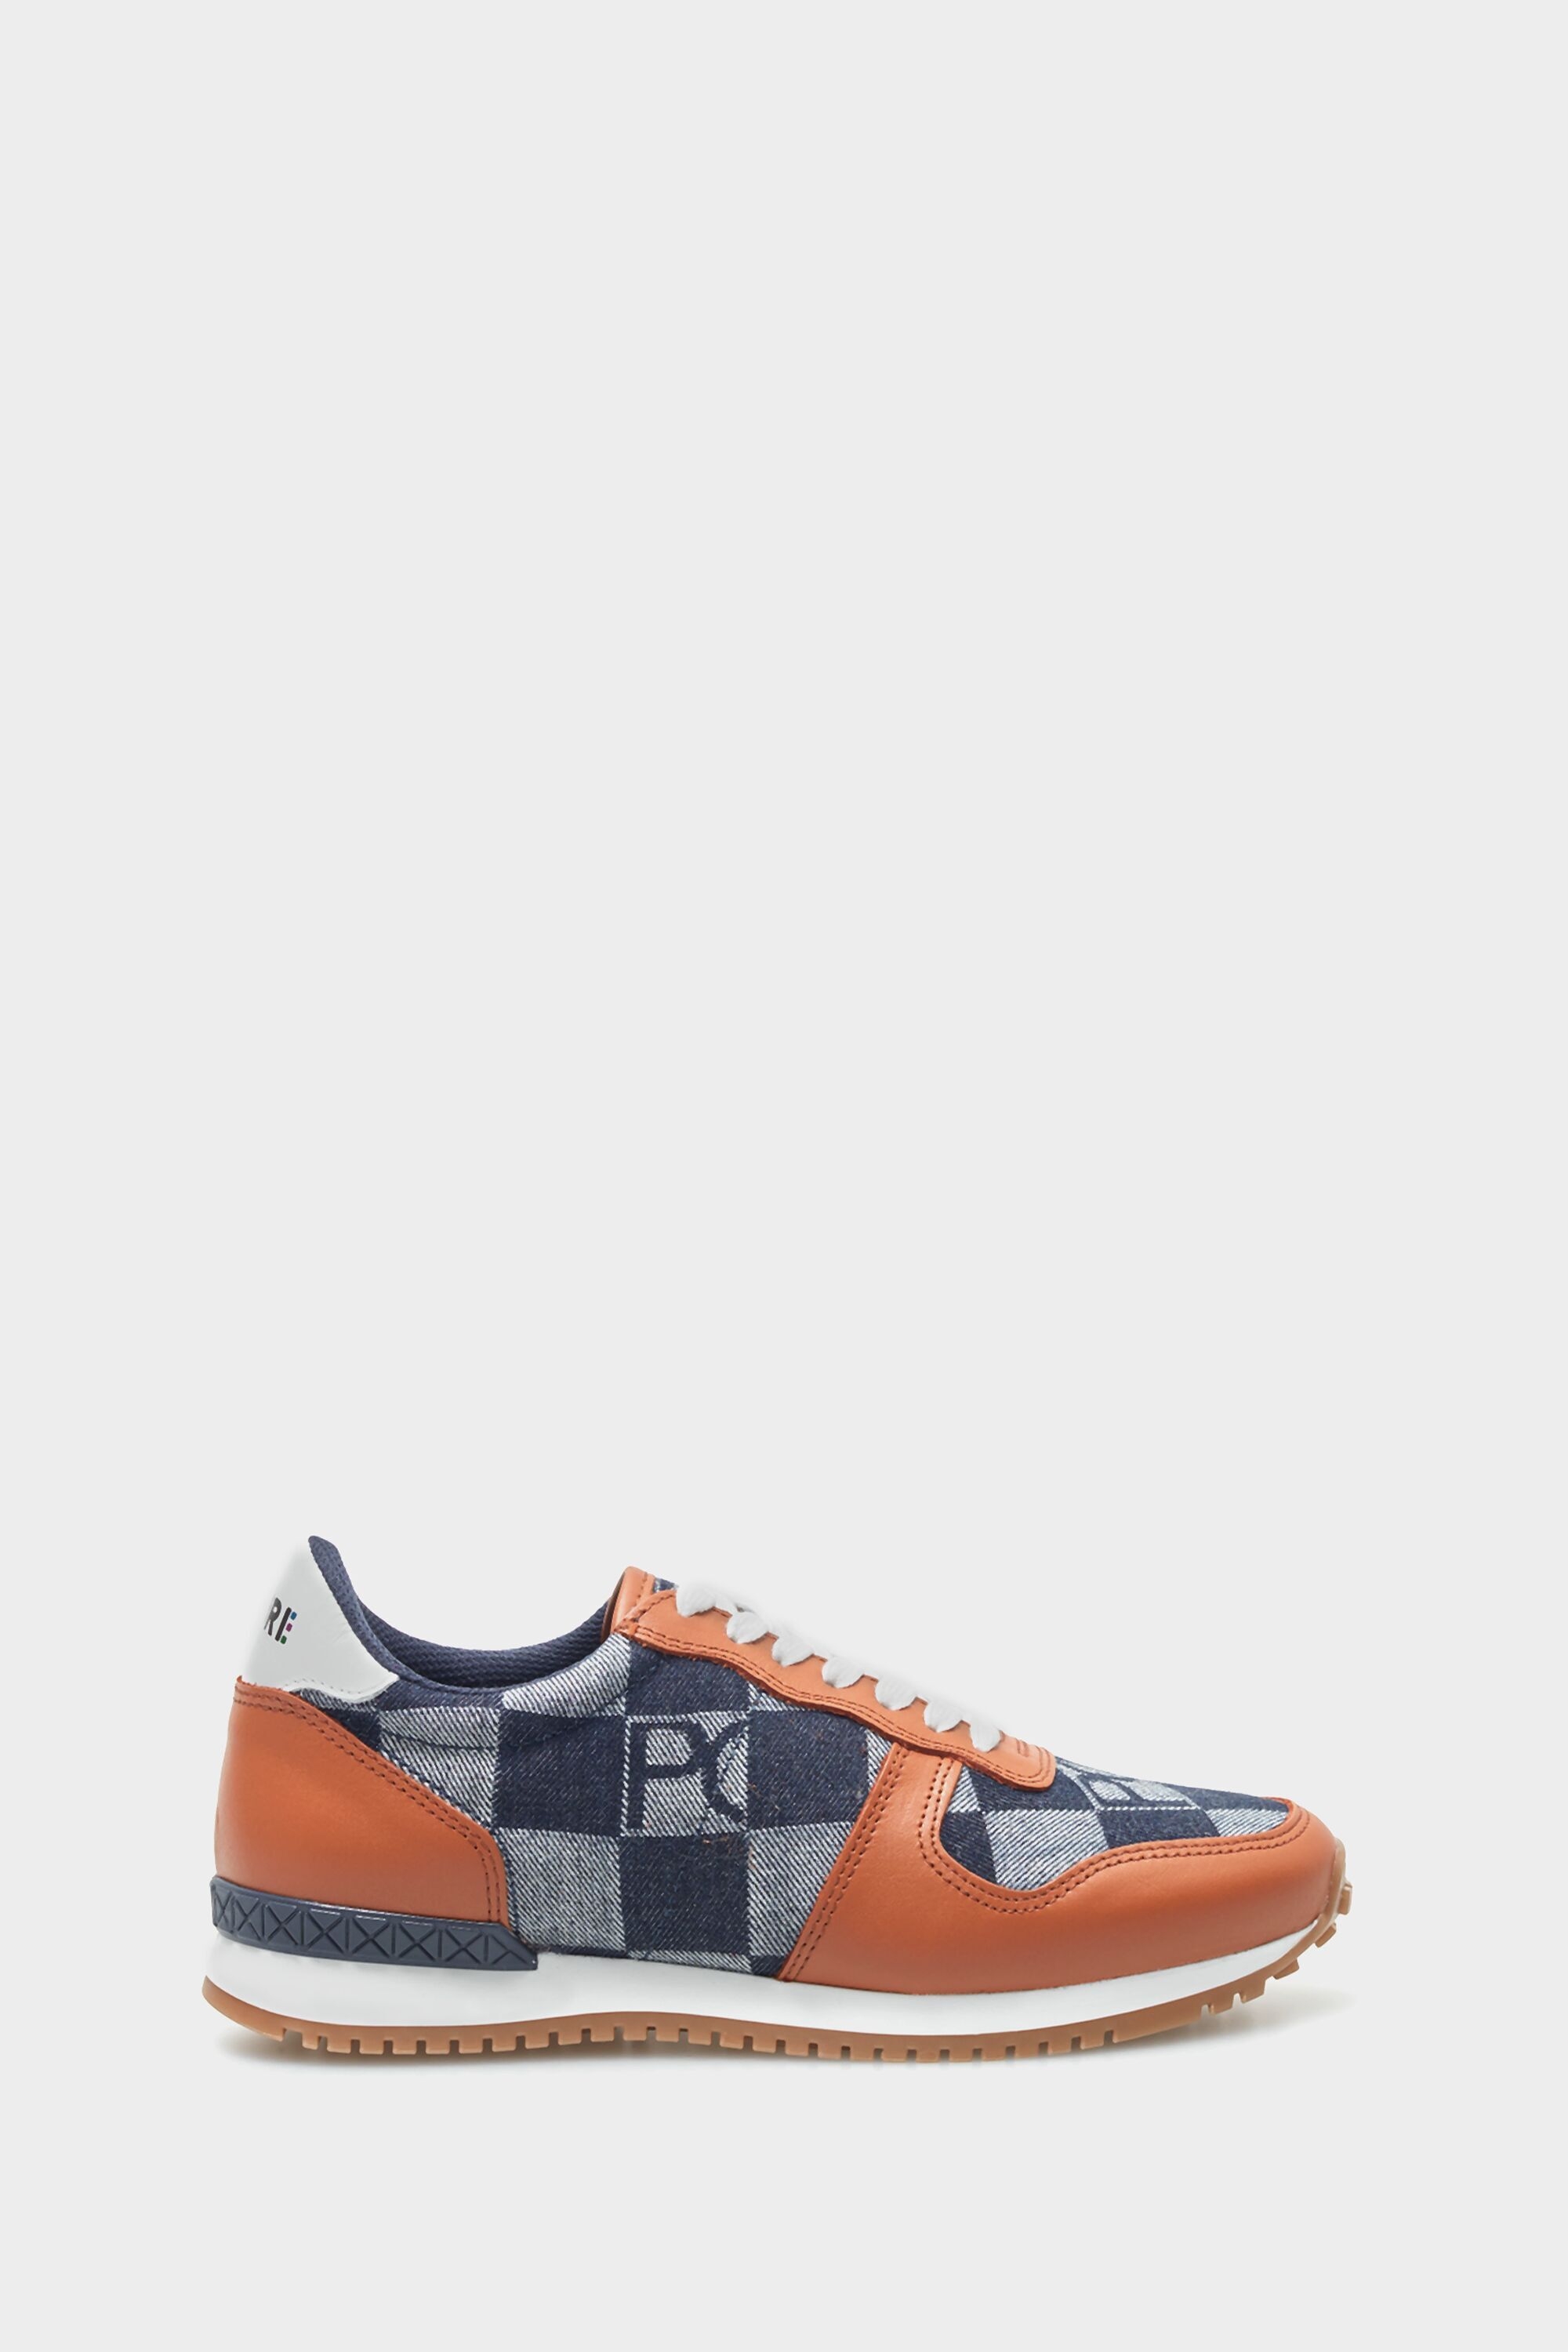 Leather and denim canvas sneakers